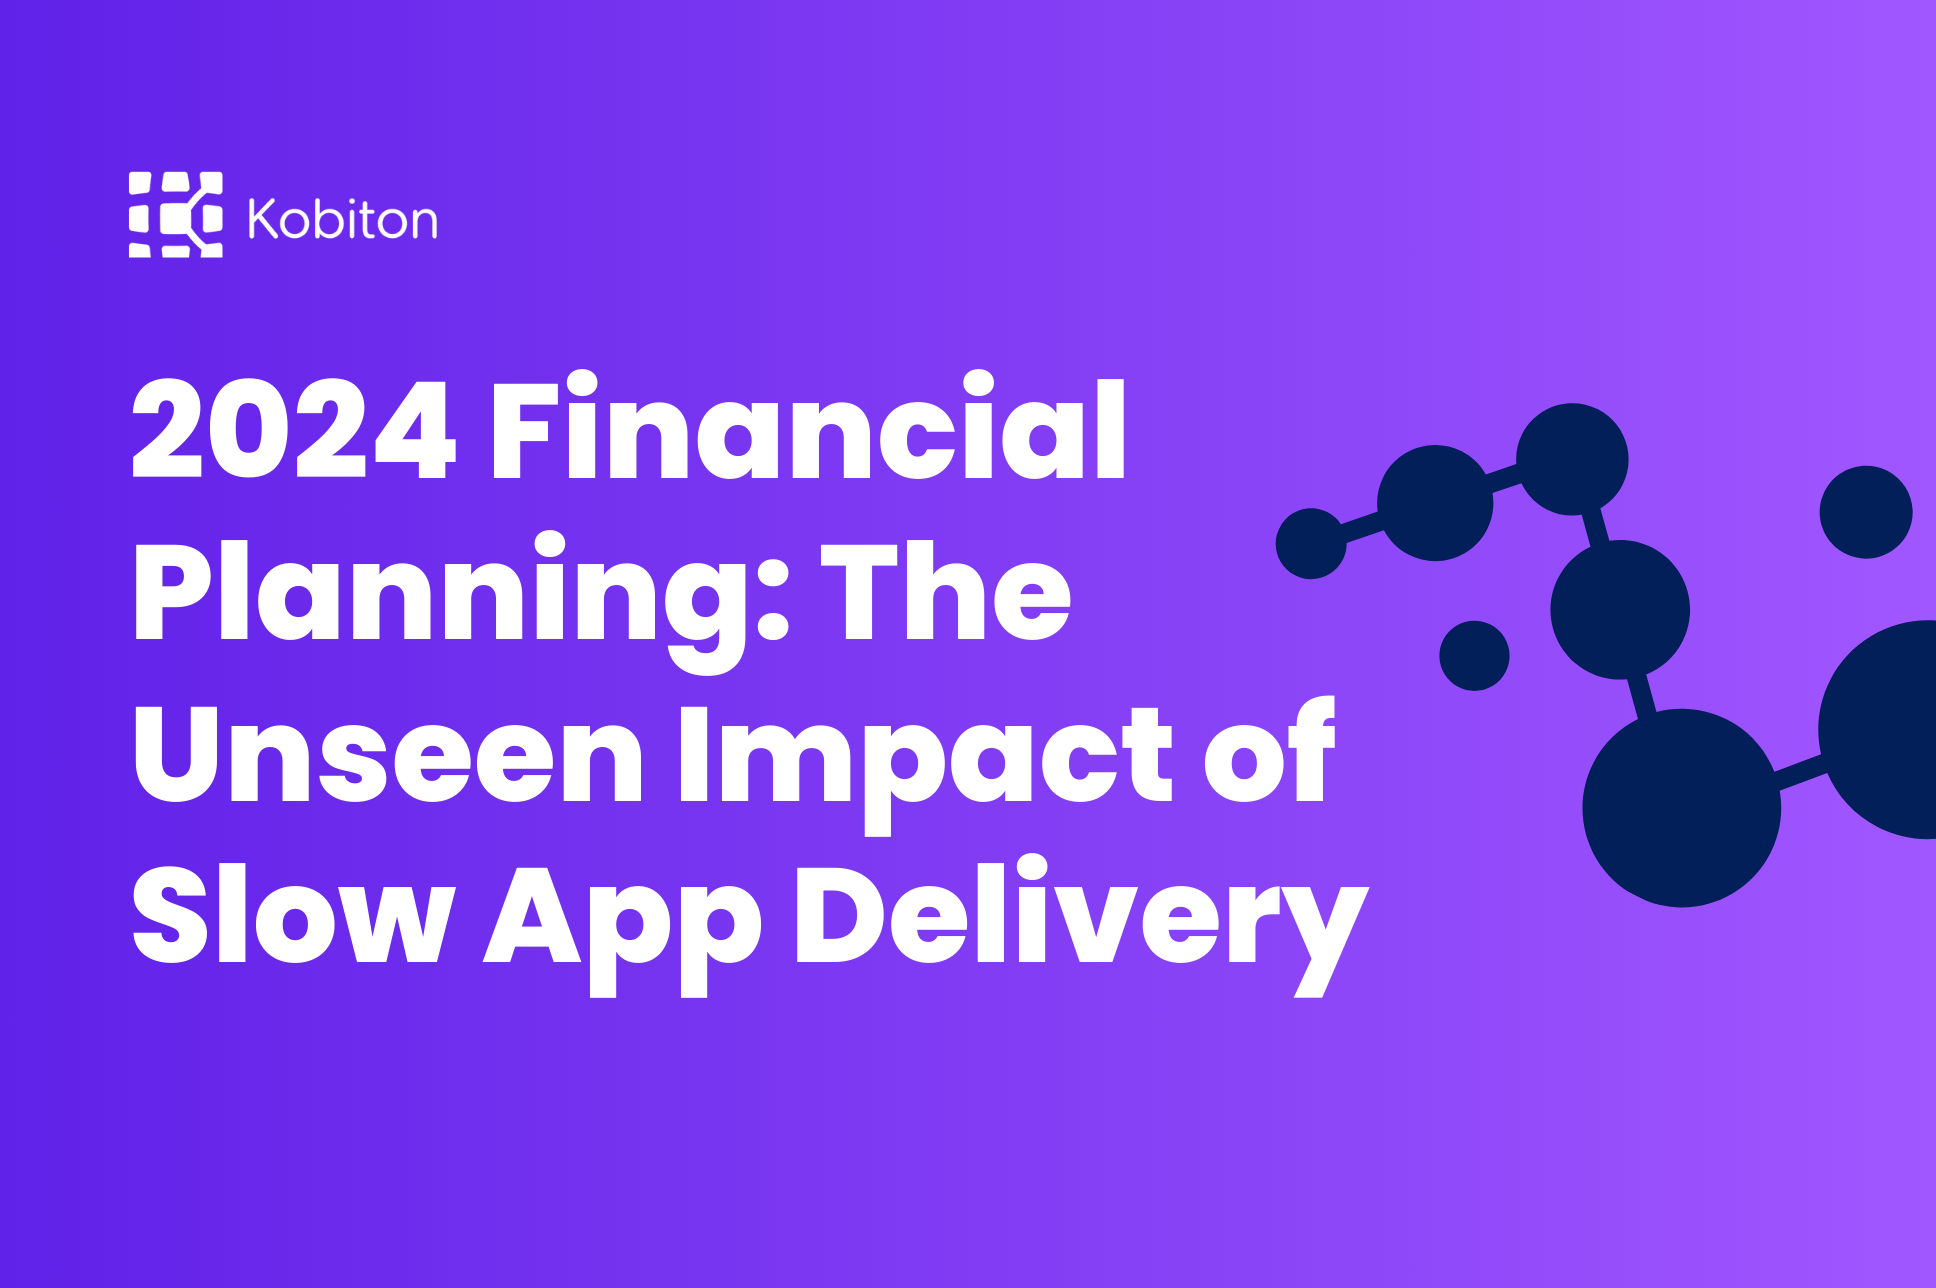 2024 Financial Planning: The Unseen Impact of Slow App Delivery